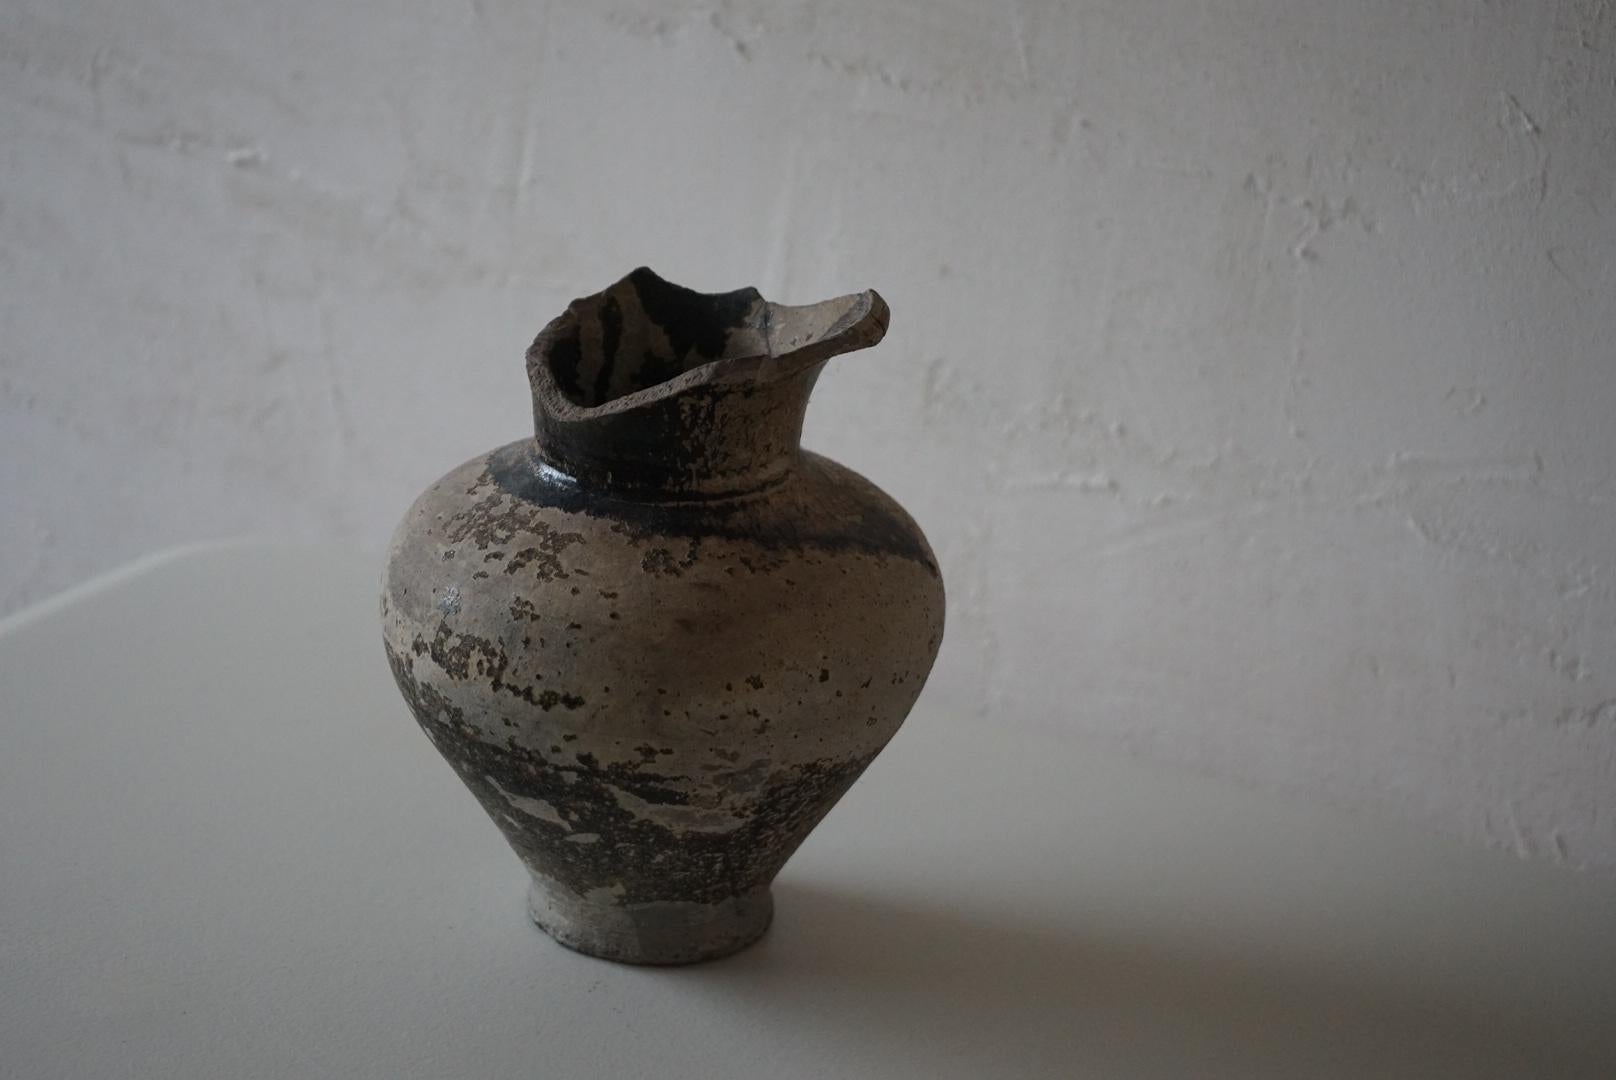 A beautiful Japanese vase.
It seems that the black glaze was originally applied, but it has peeled off and the base is visible.
You can't imitate the way nature changes.
The mouth is cracked and there is a repair in one place.
It is recommended